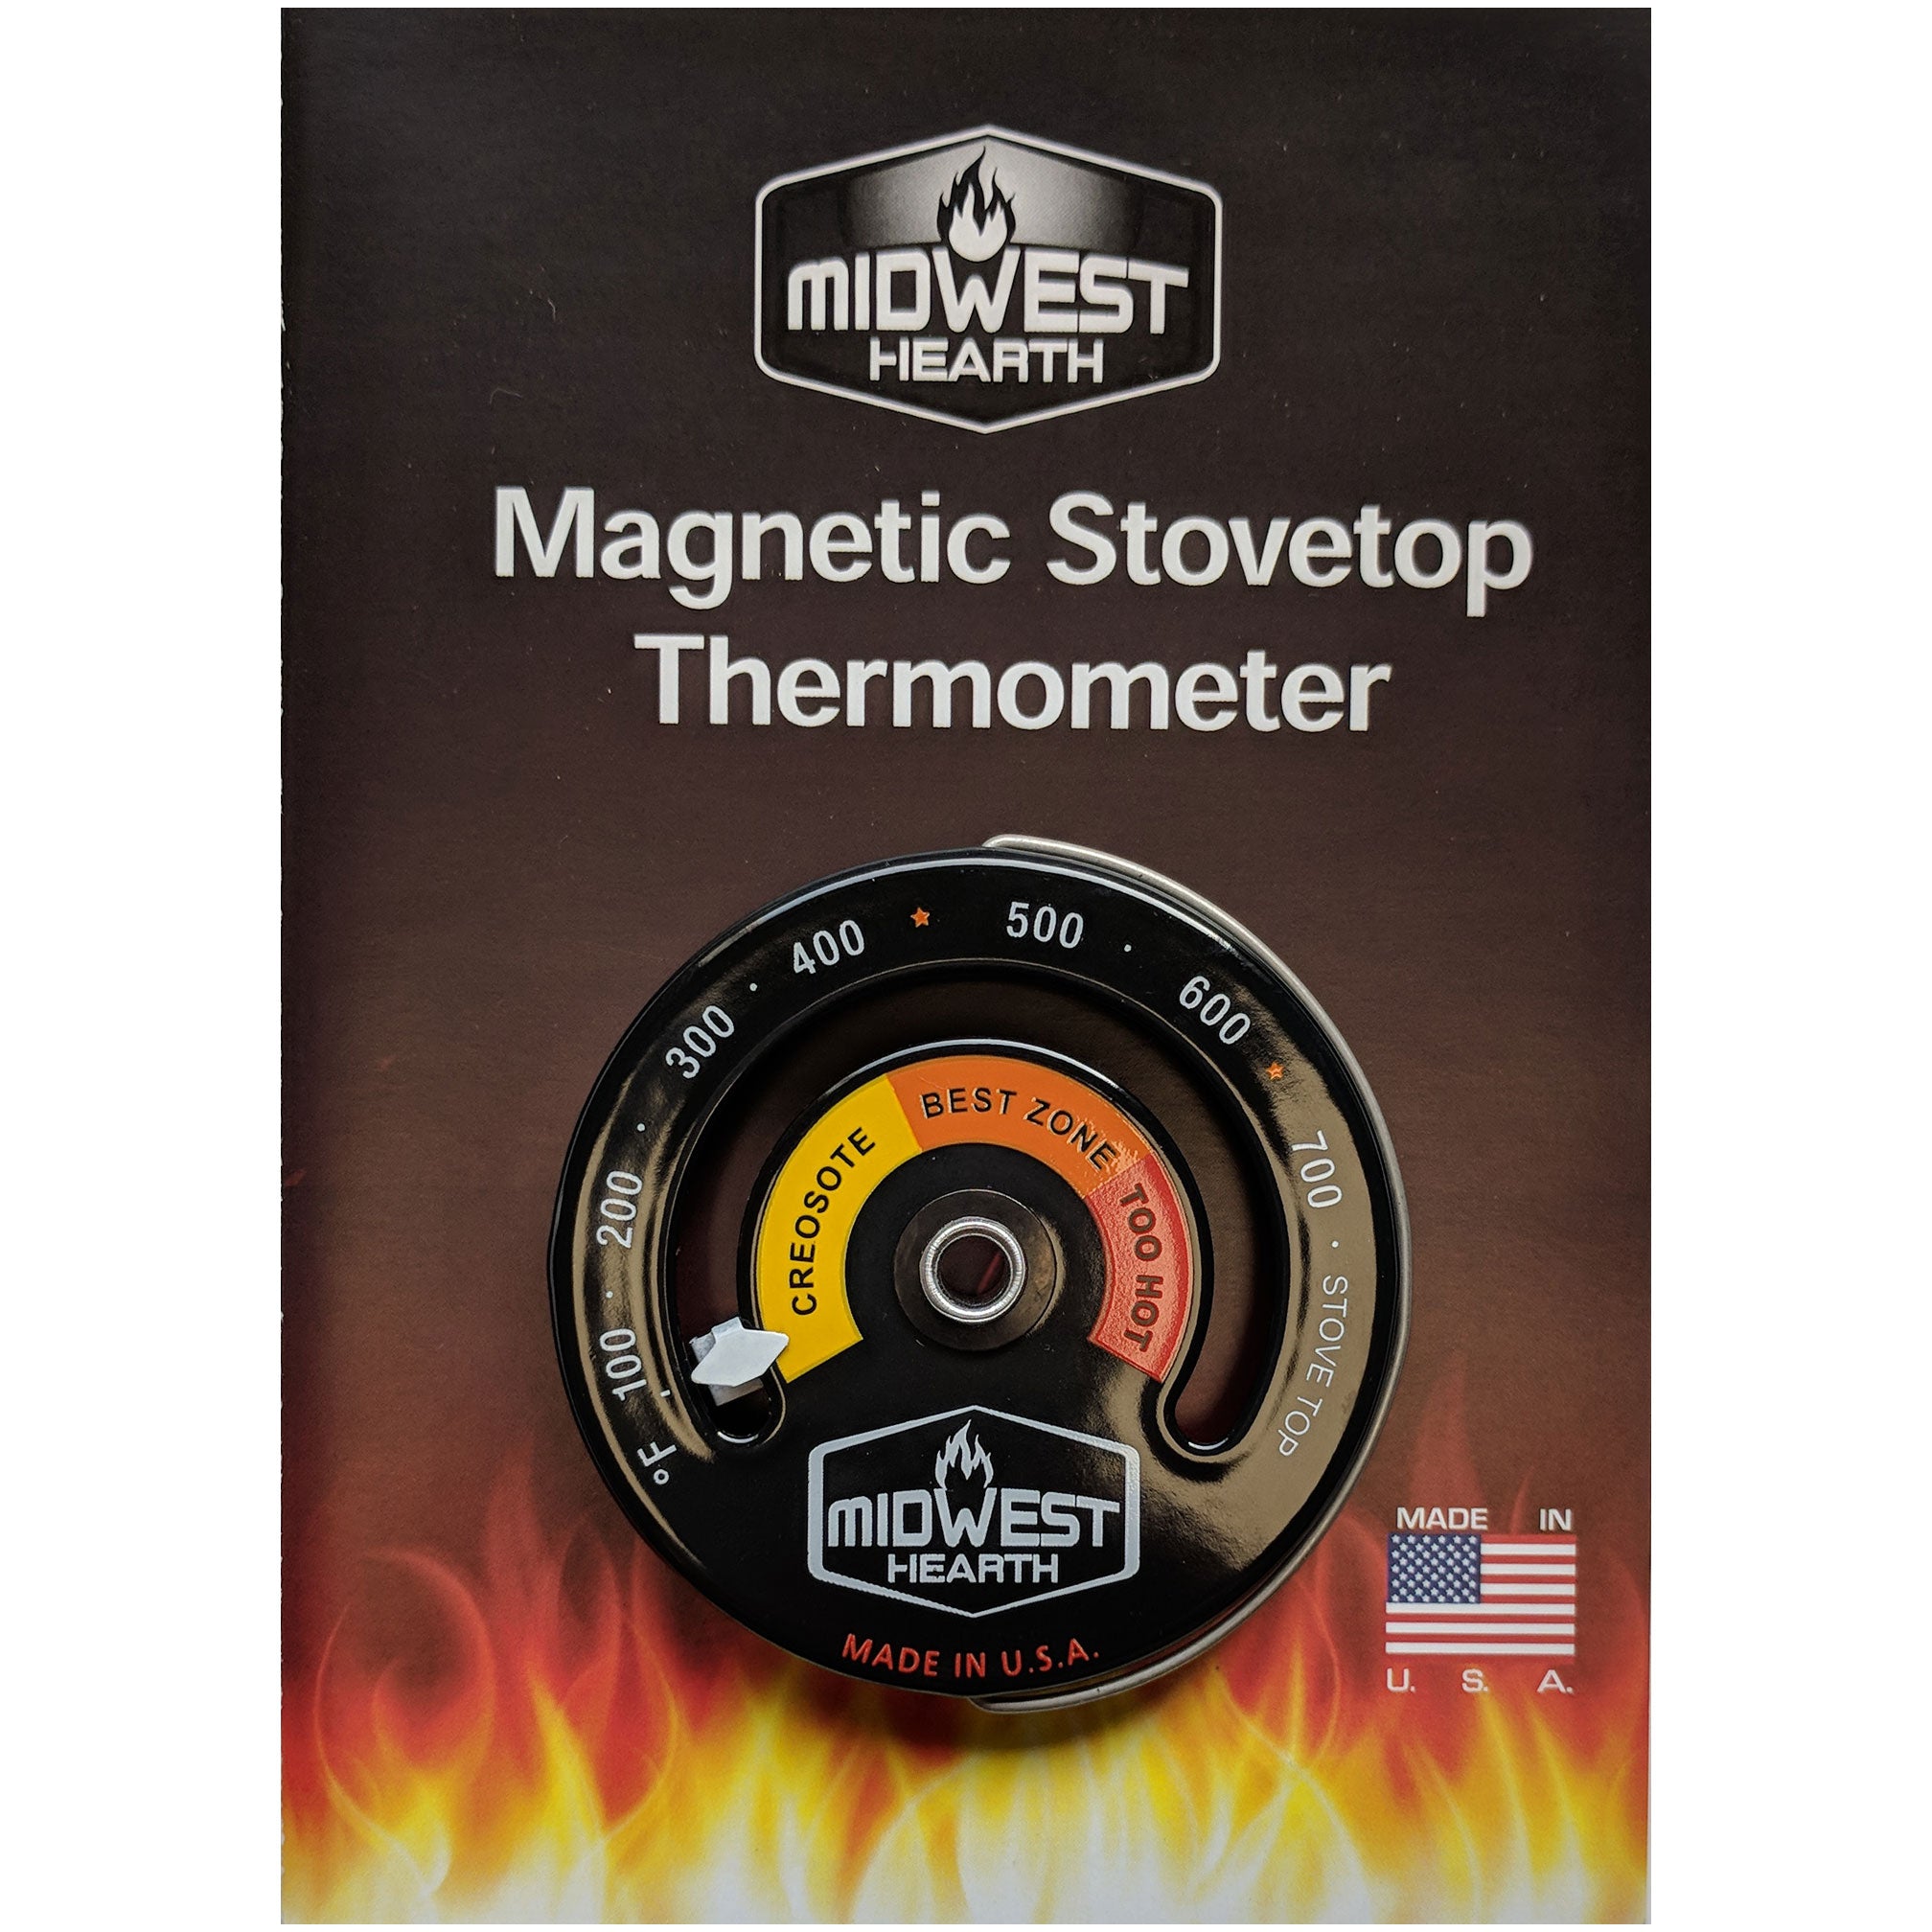 Stove Thermometer for Wood and Pellet Stoves